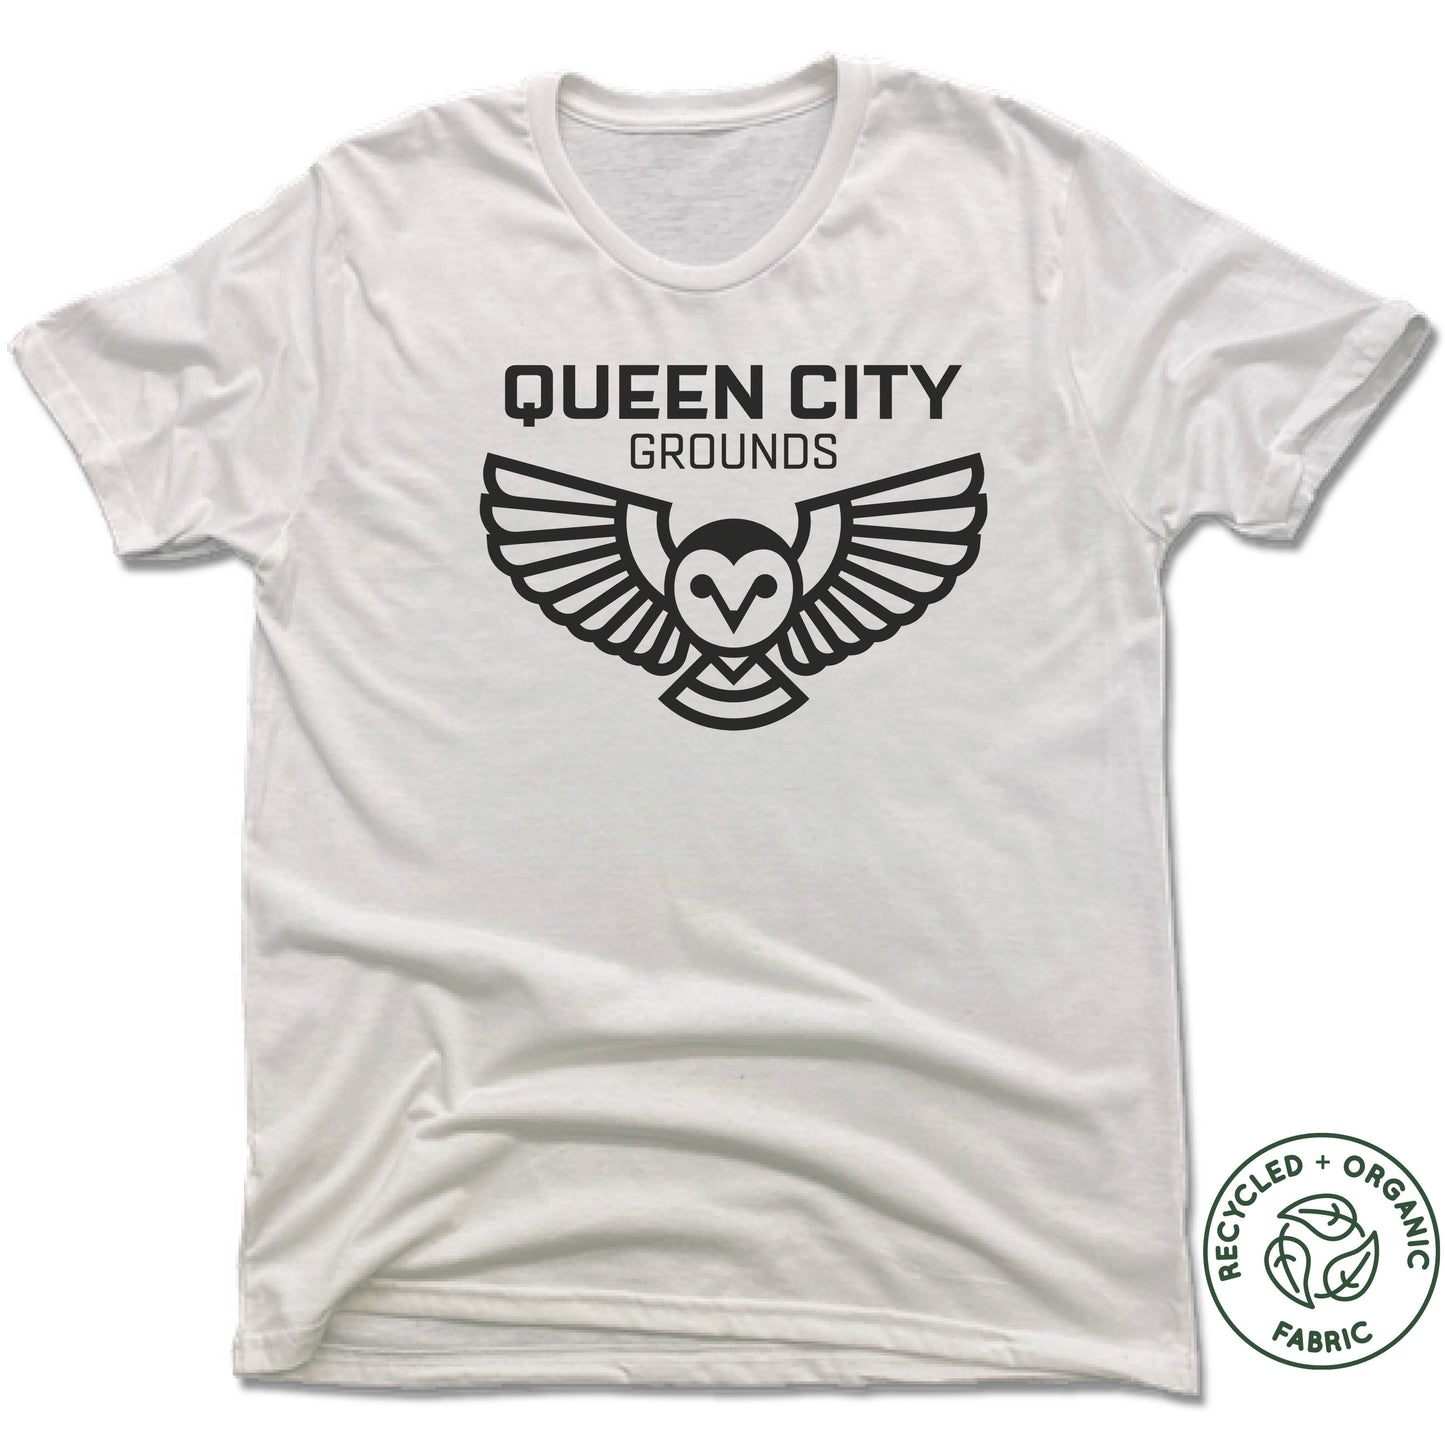 QUEEN CITY GROUNDS | UNISEX WHITE Recycled Tri-Blend